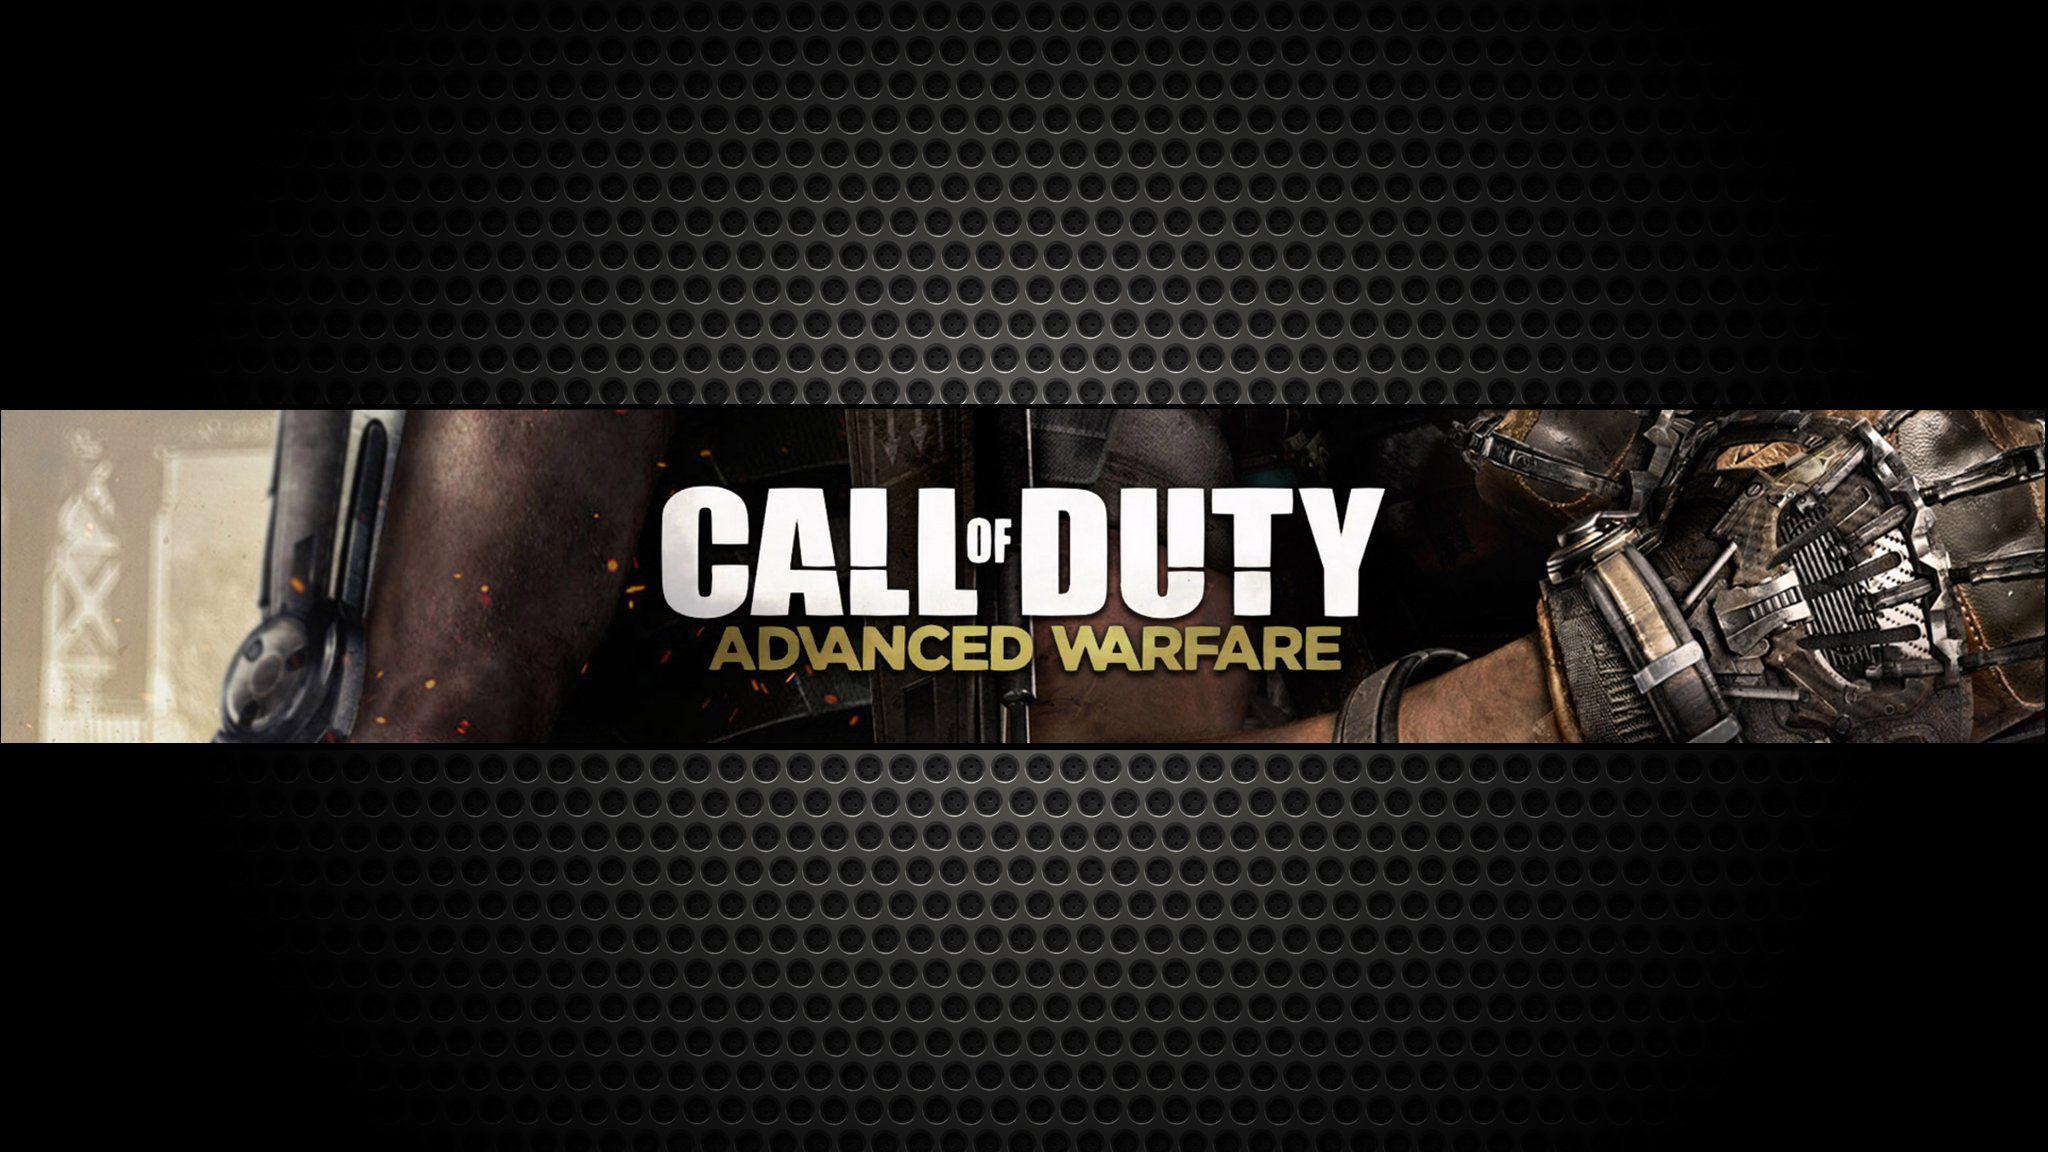 2048 pixels wide and 1152 pixels tall call of duty